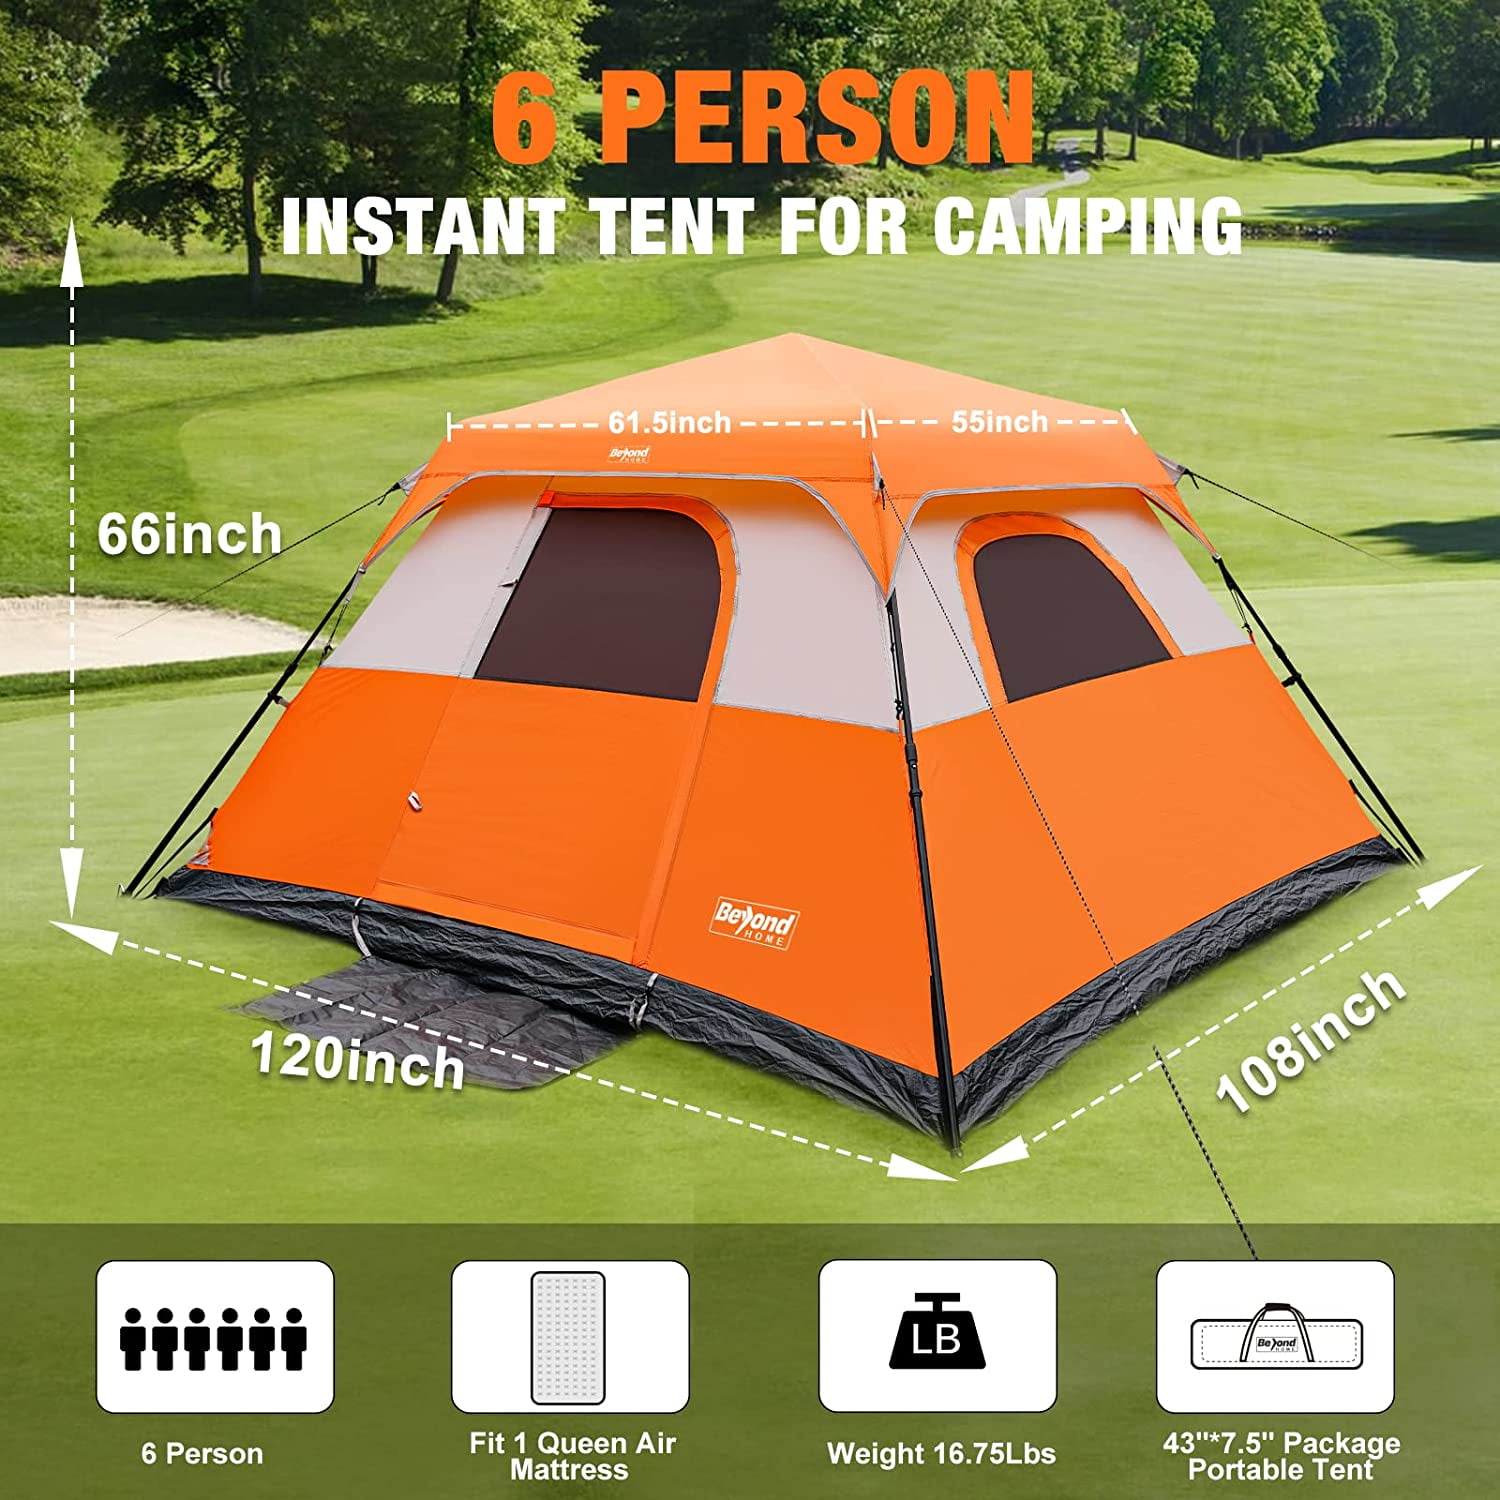 Beangstigend Melbourne mesh BeyondHOME 6-Person Camping Tent, for Family Camping & Hiking, Upgraded  Ventilation - Walmart.com